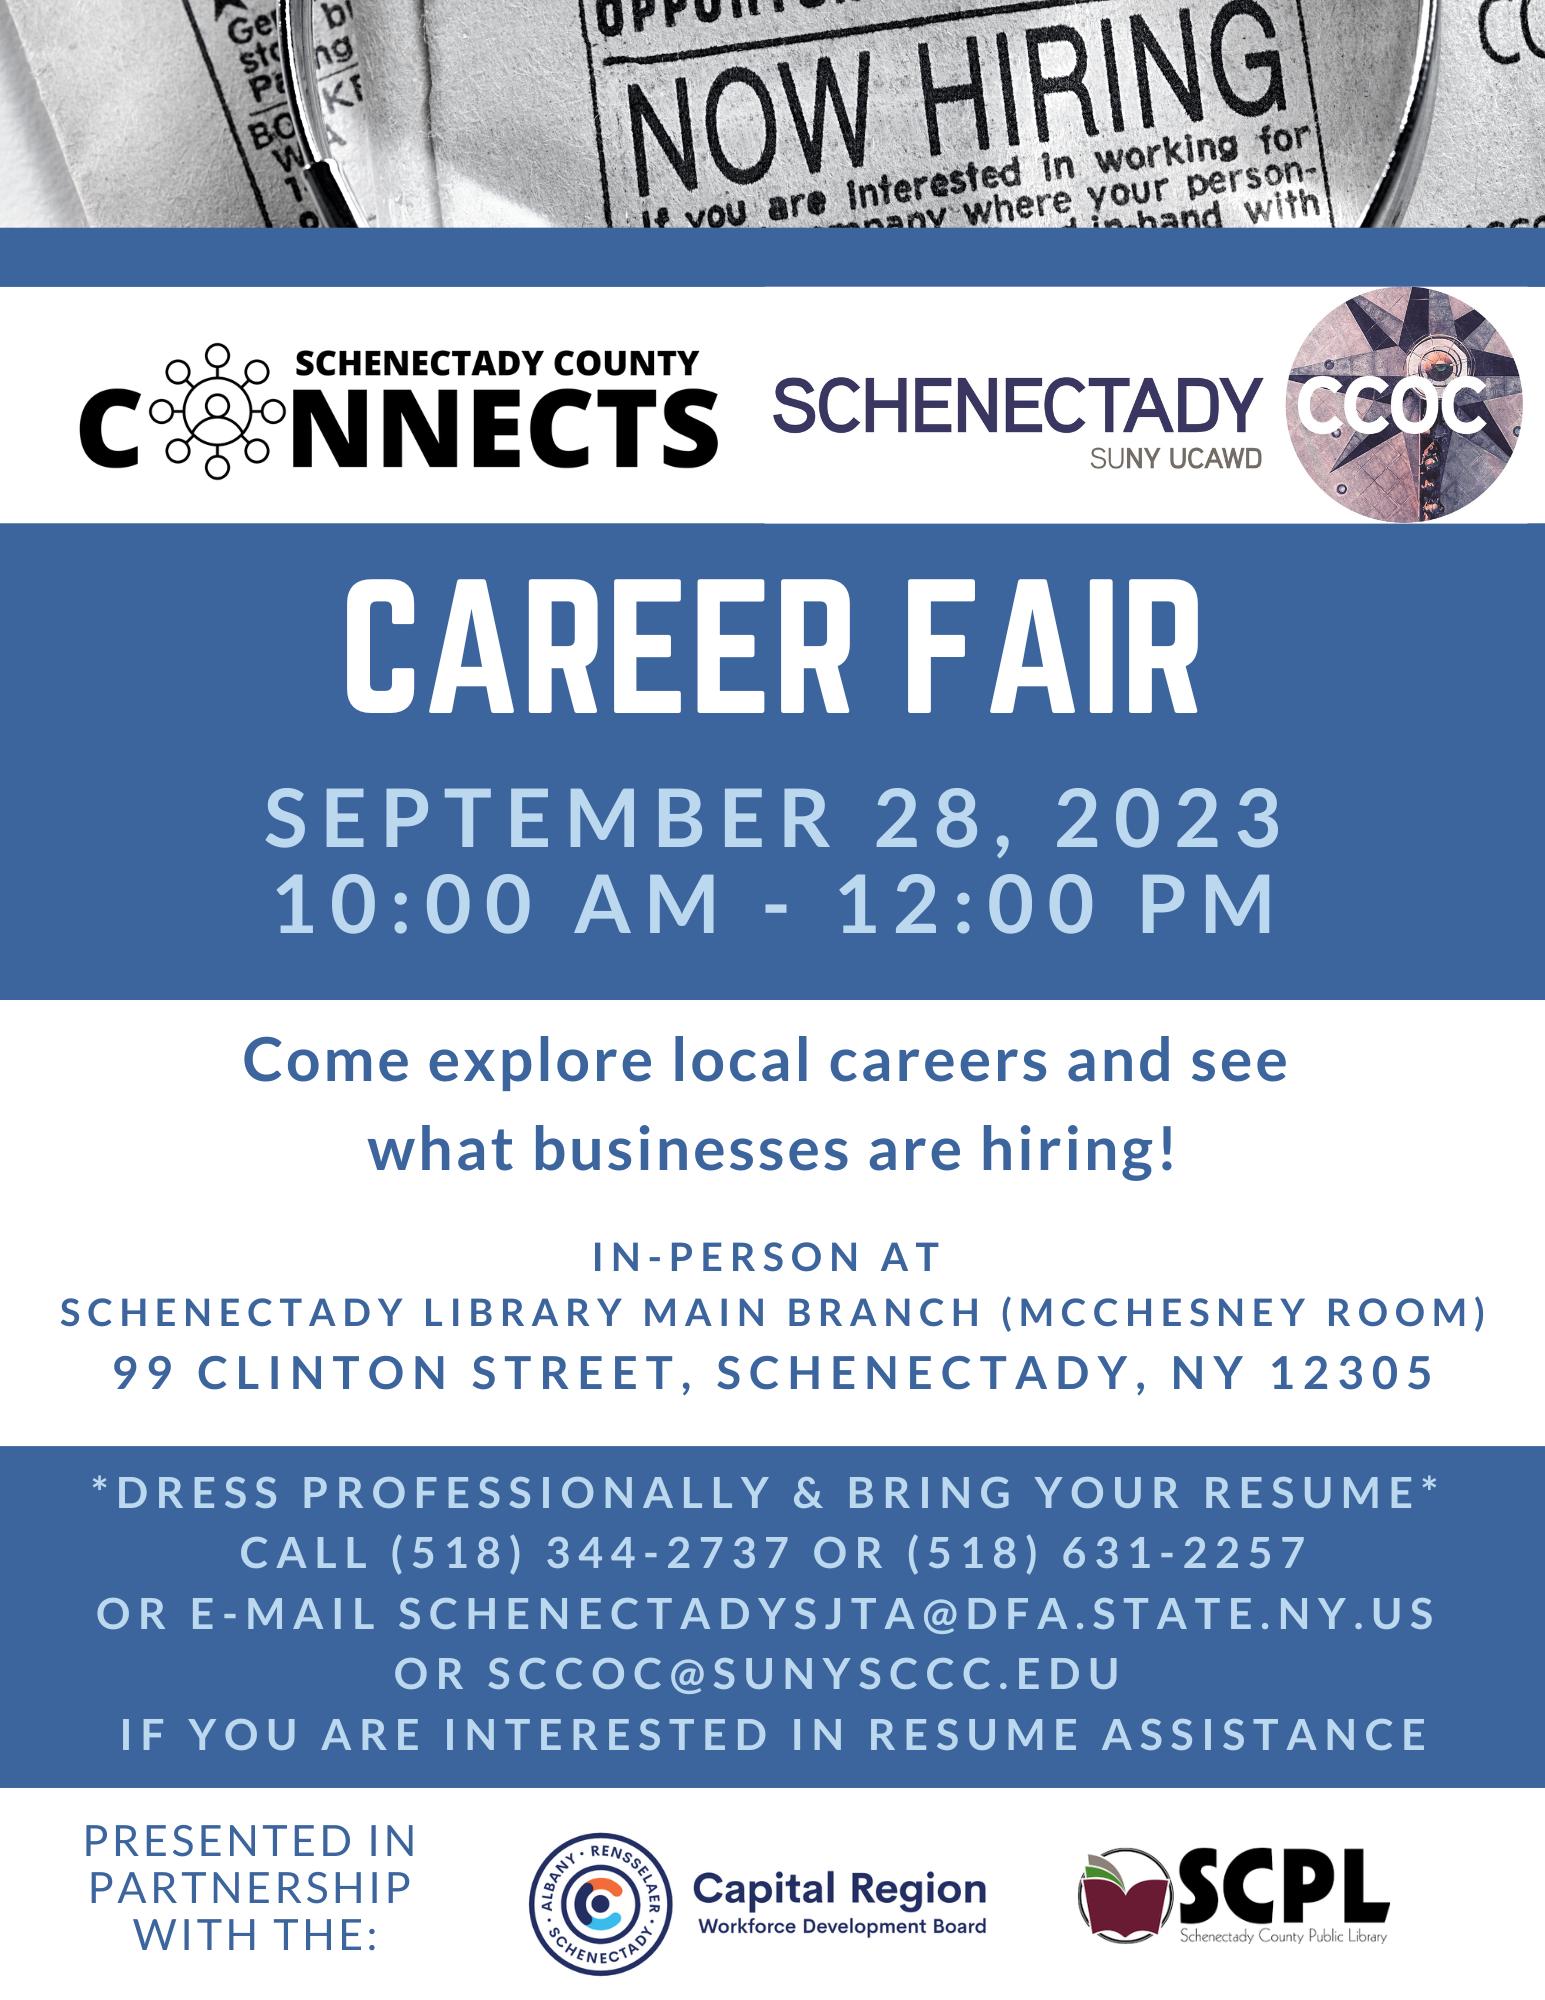 Schenectady Connects Career Fair Flyer